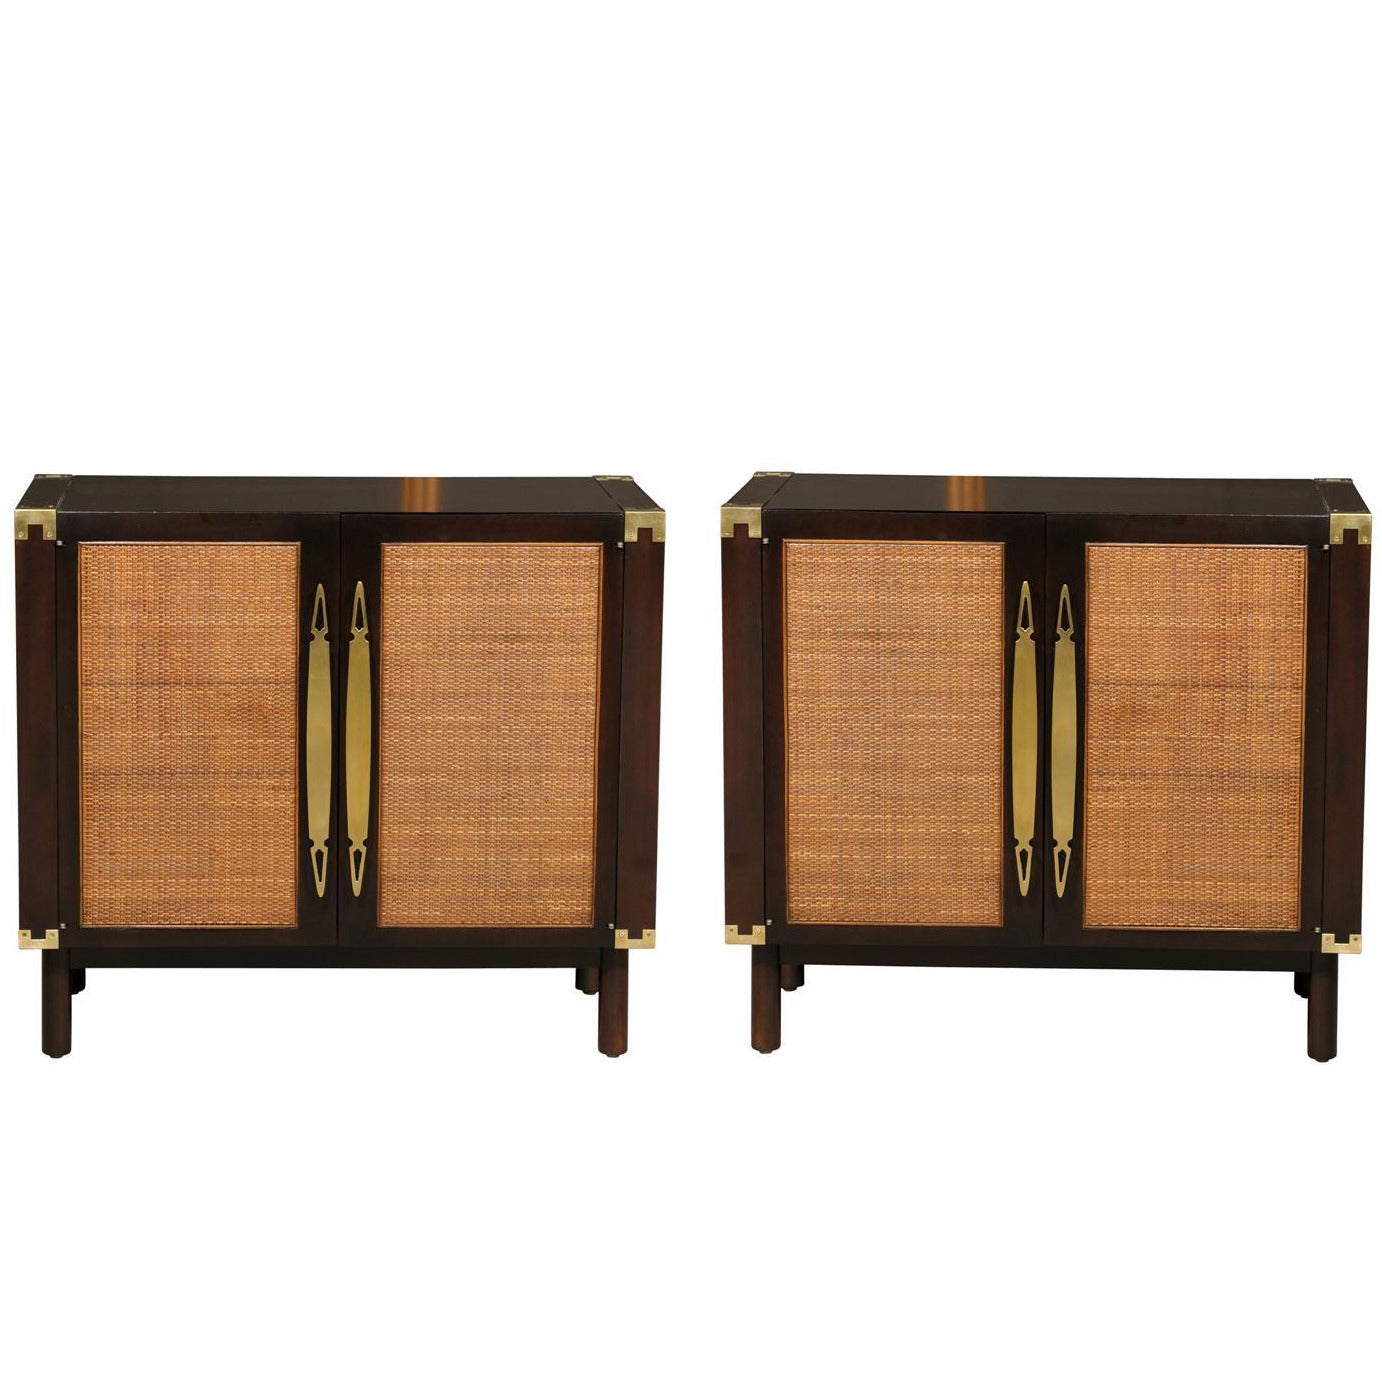 Sophisticated Pair of Walnut Cabinets with Raffia and Brass Accents